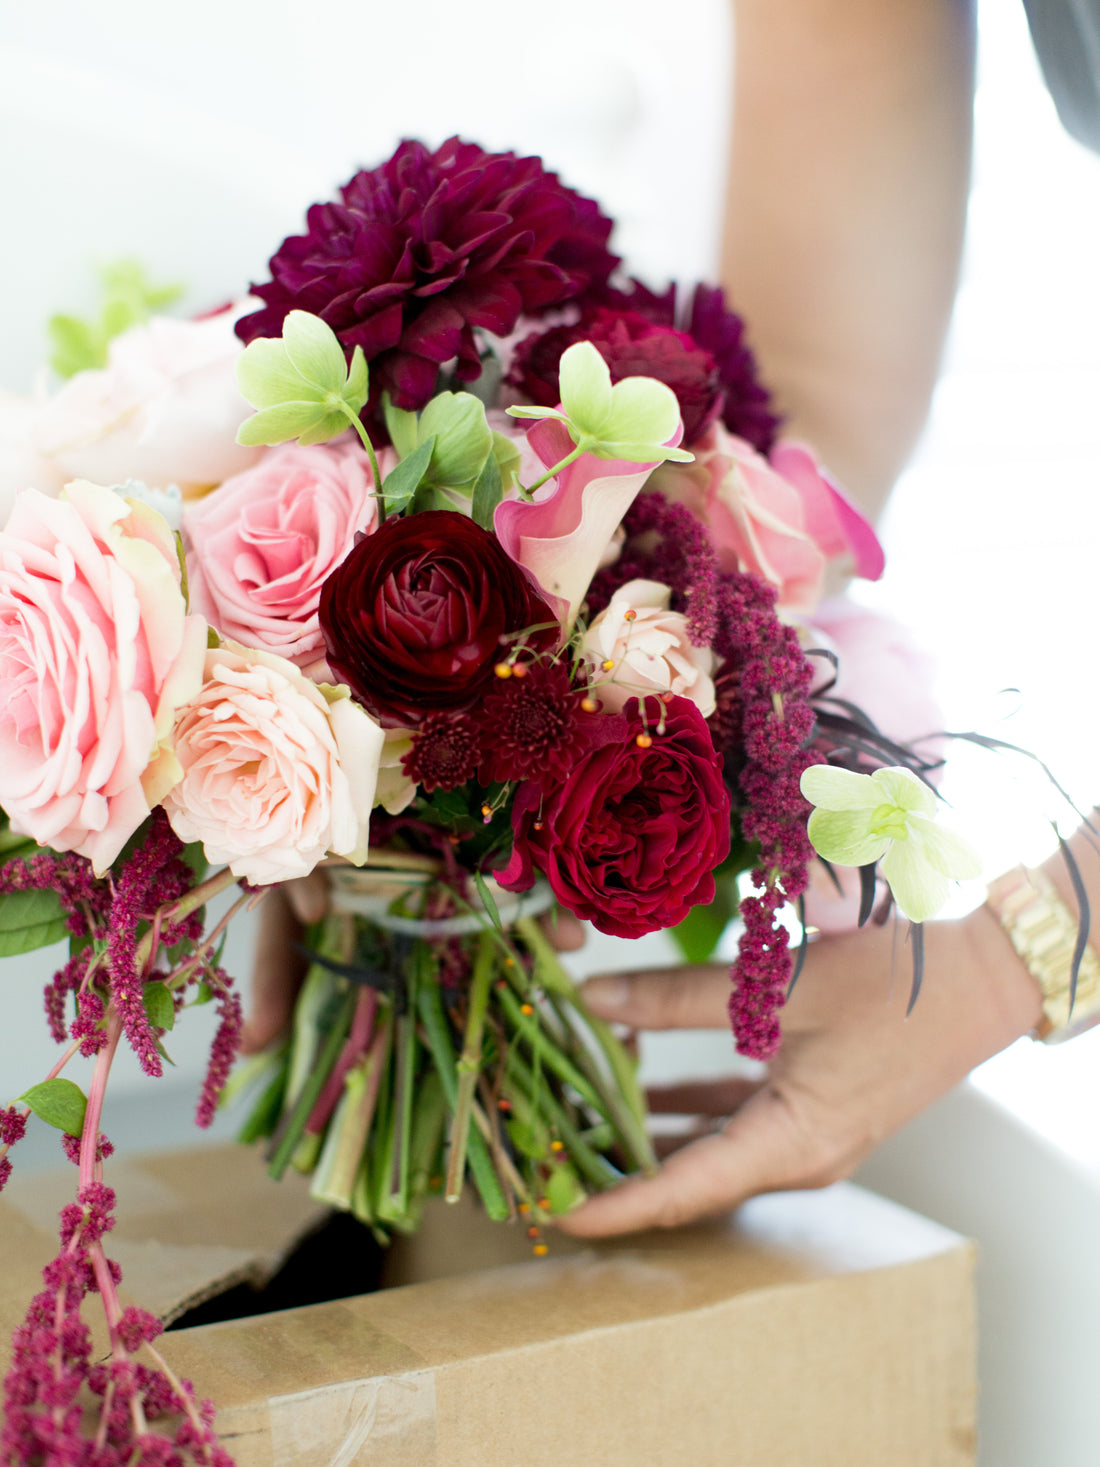 How To: Use A Box To Deliver Flowers Like A Pro